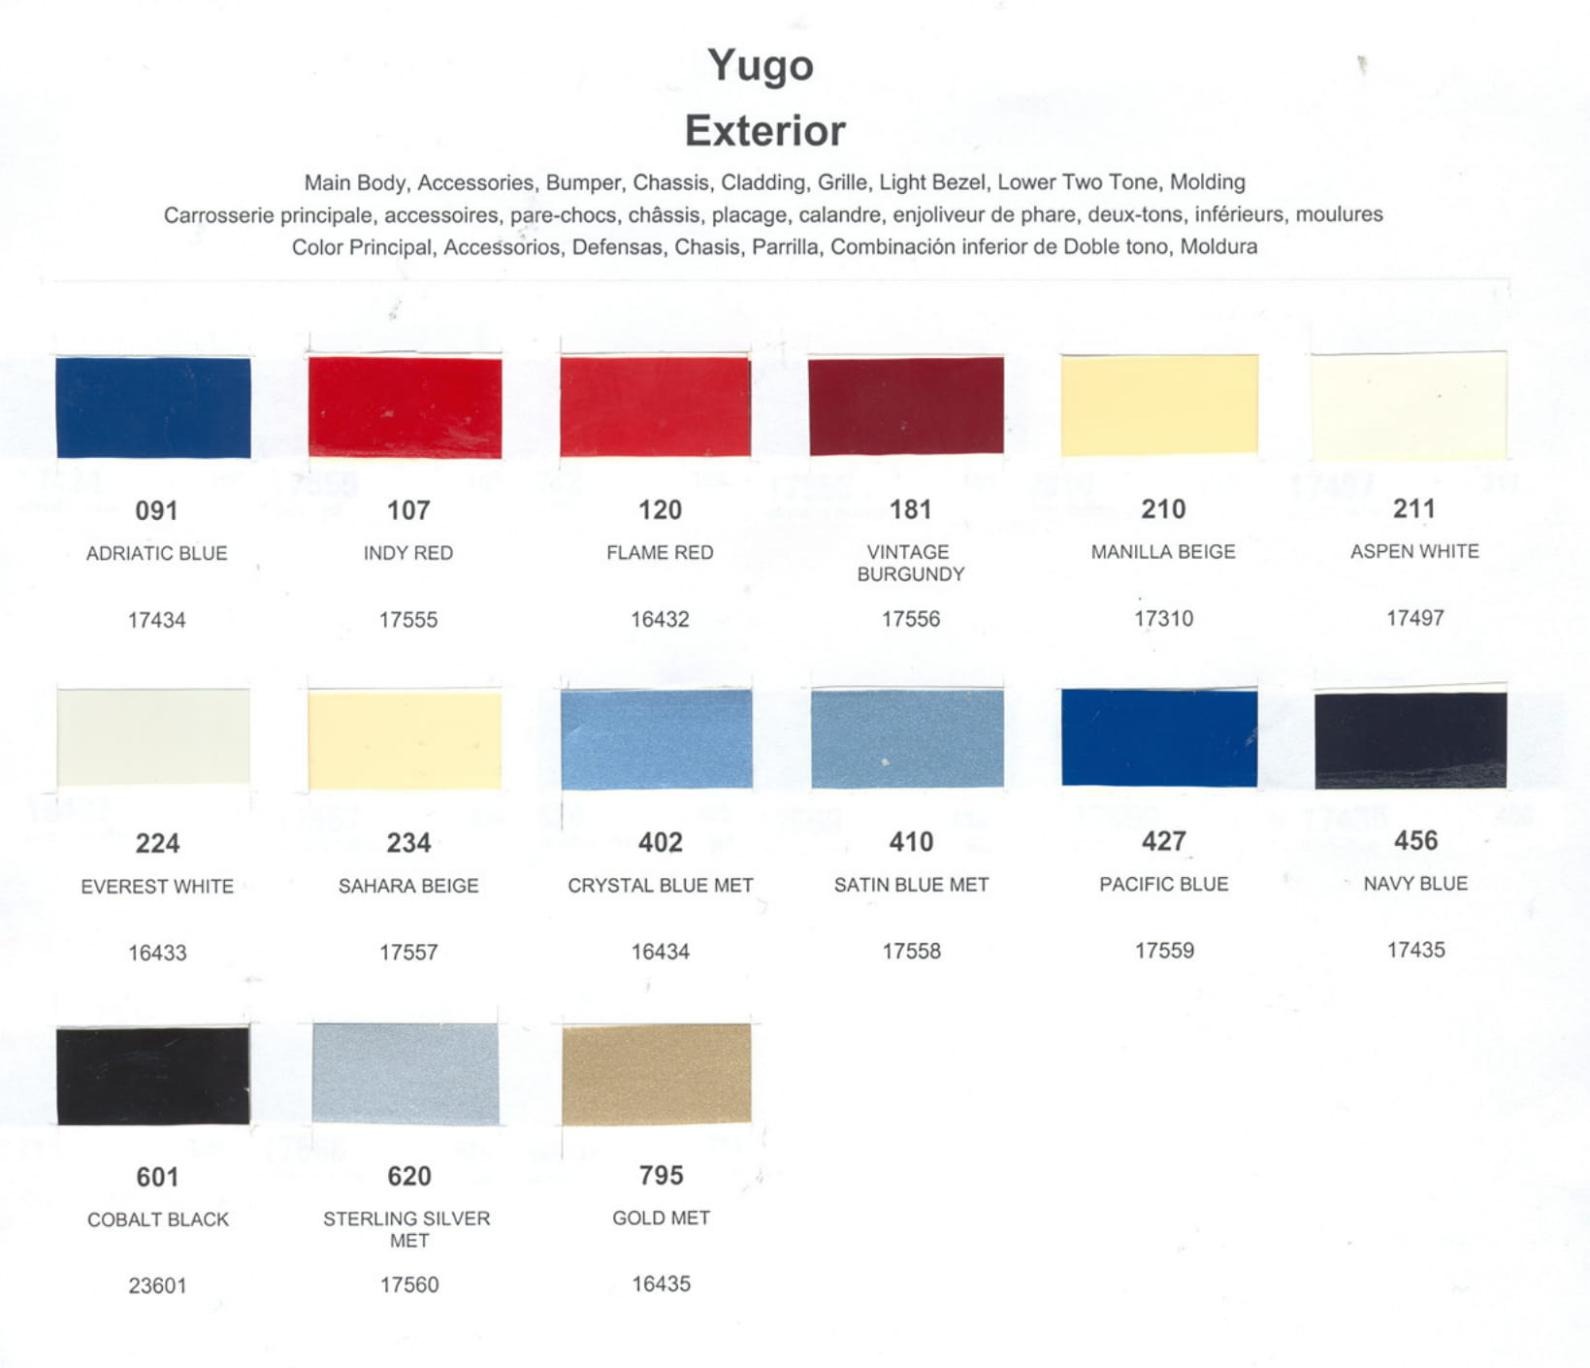 Exterior Colors and their paint codes used on Yugo in 1987